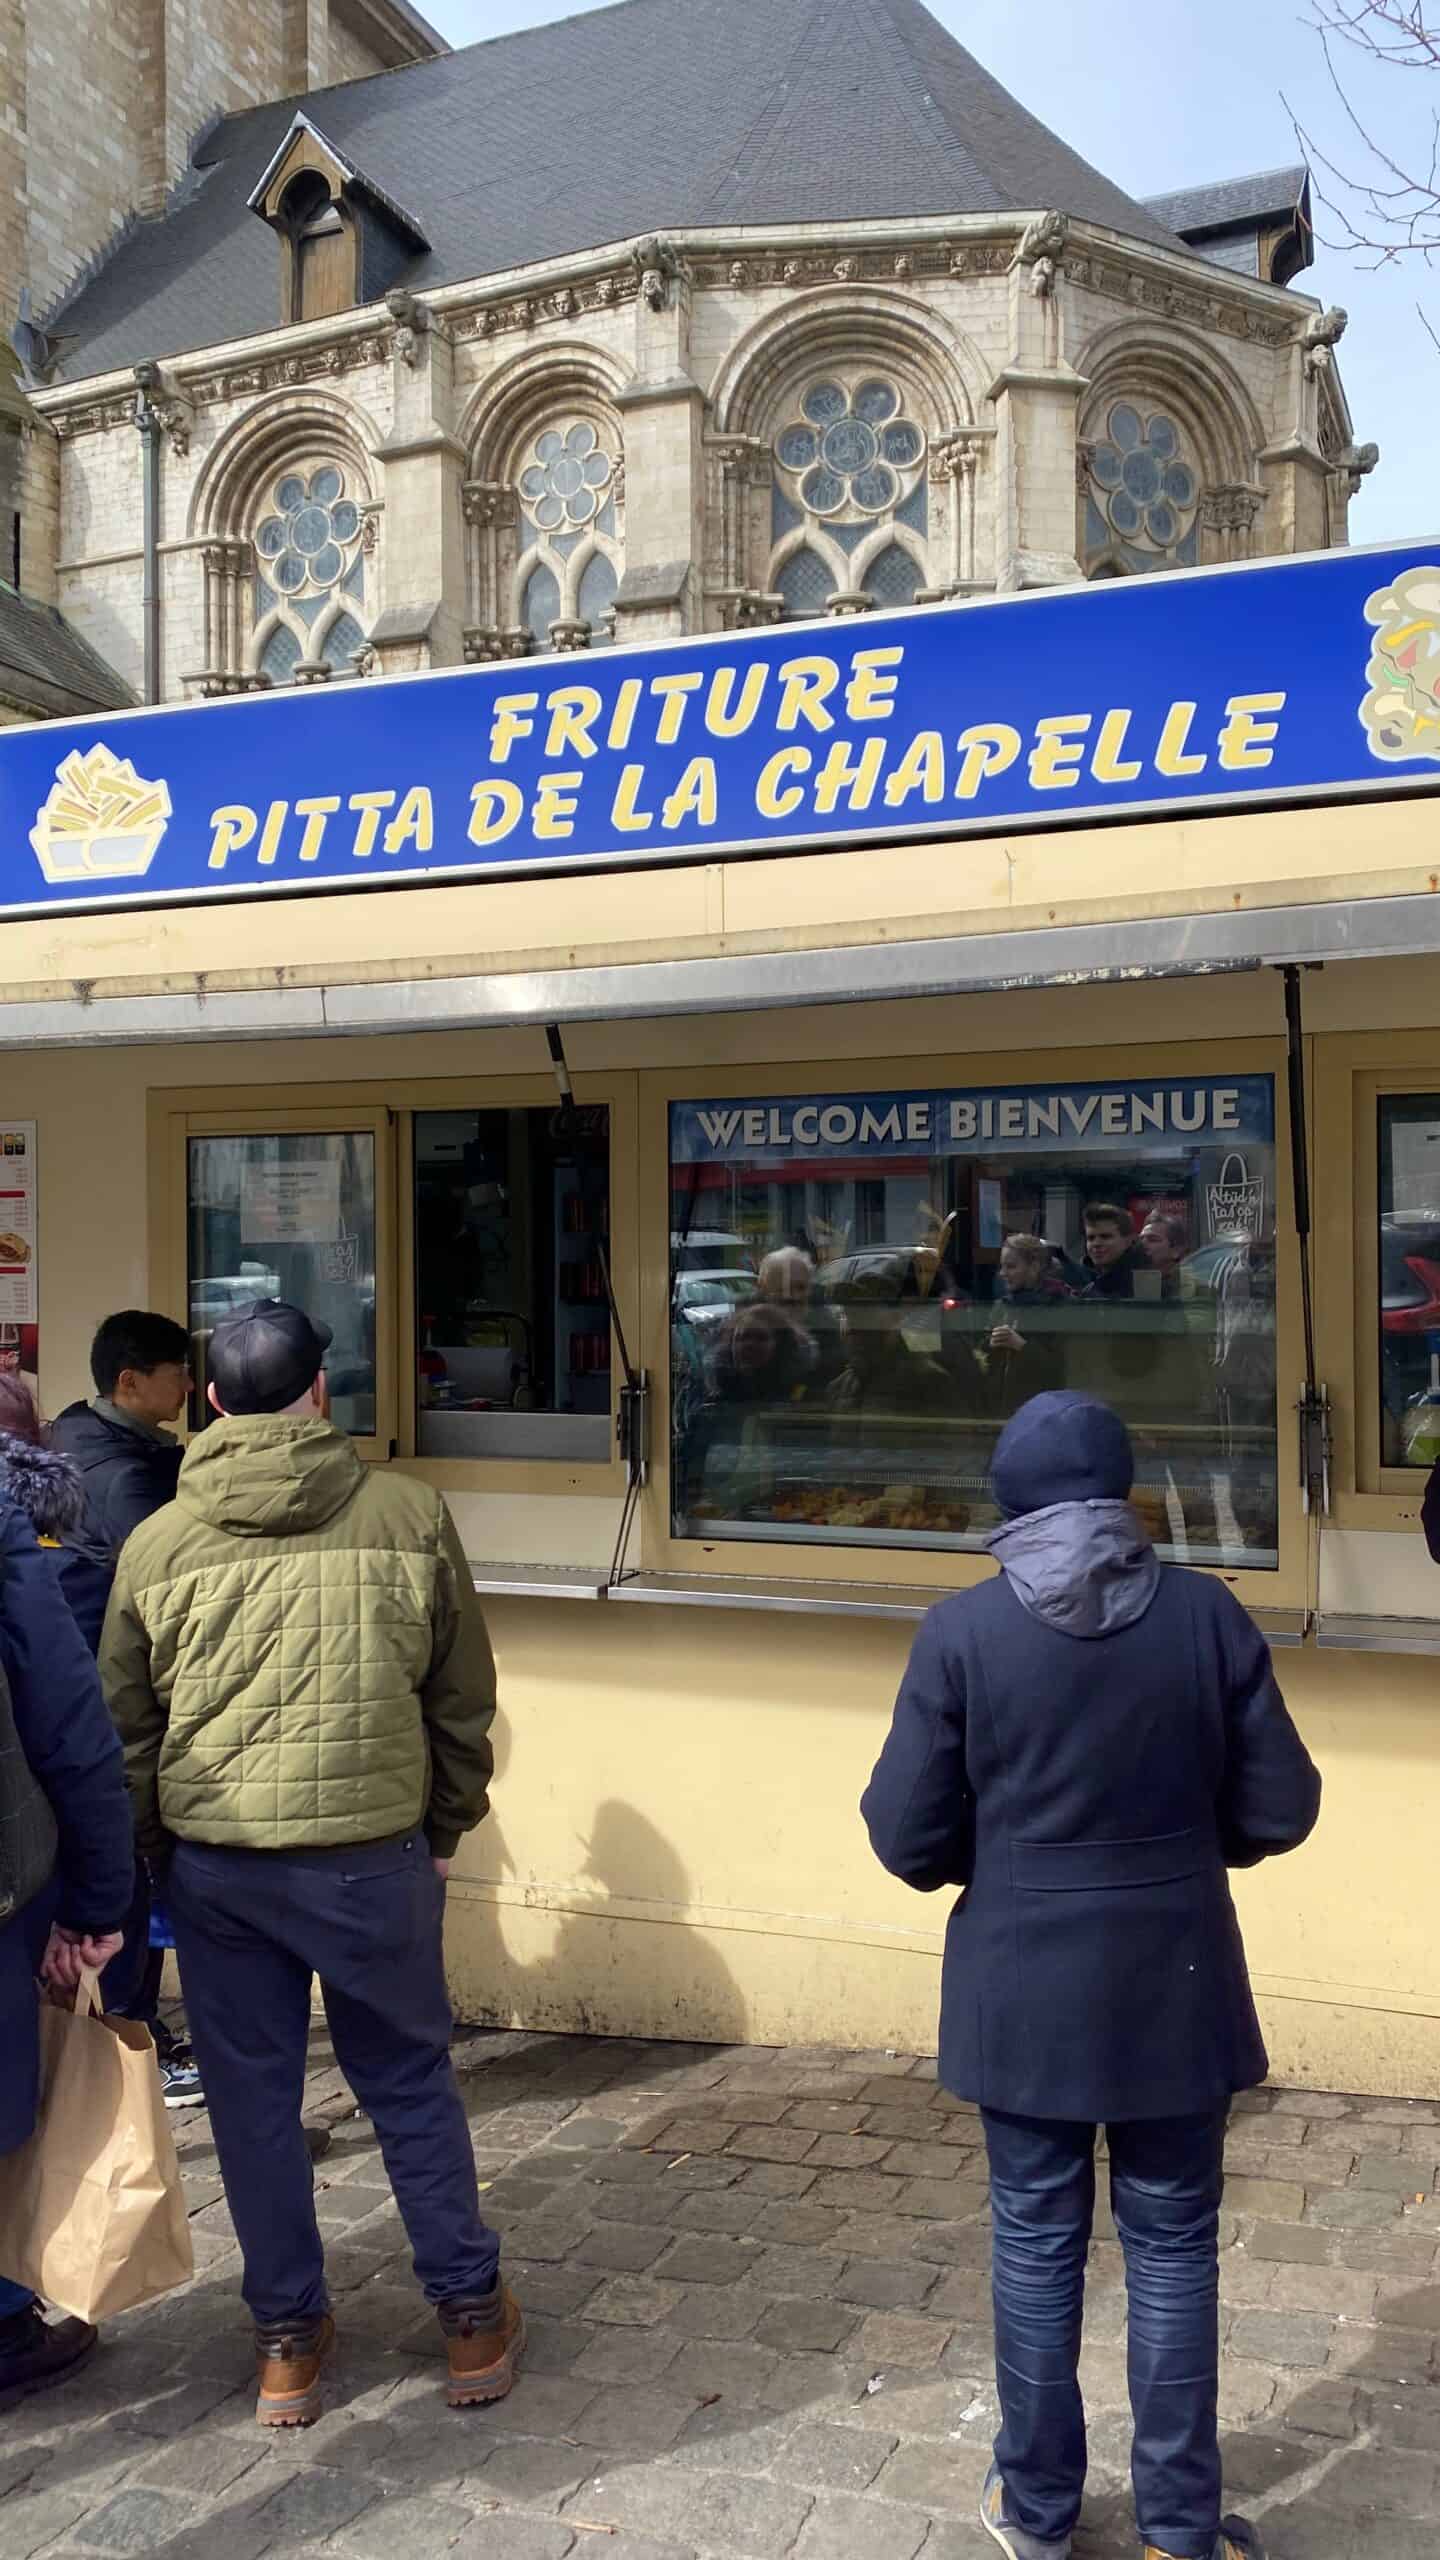 A local street shop that specializes in amazing Belgian frites.